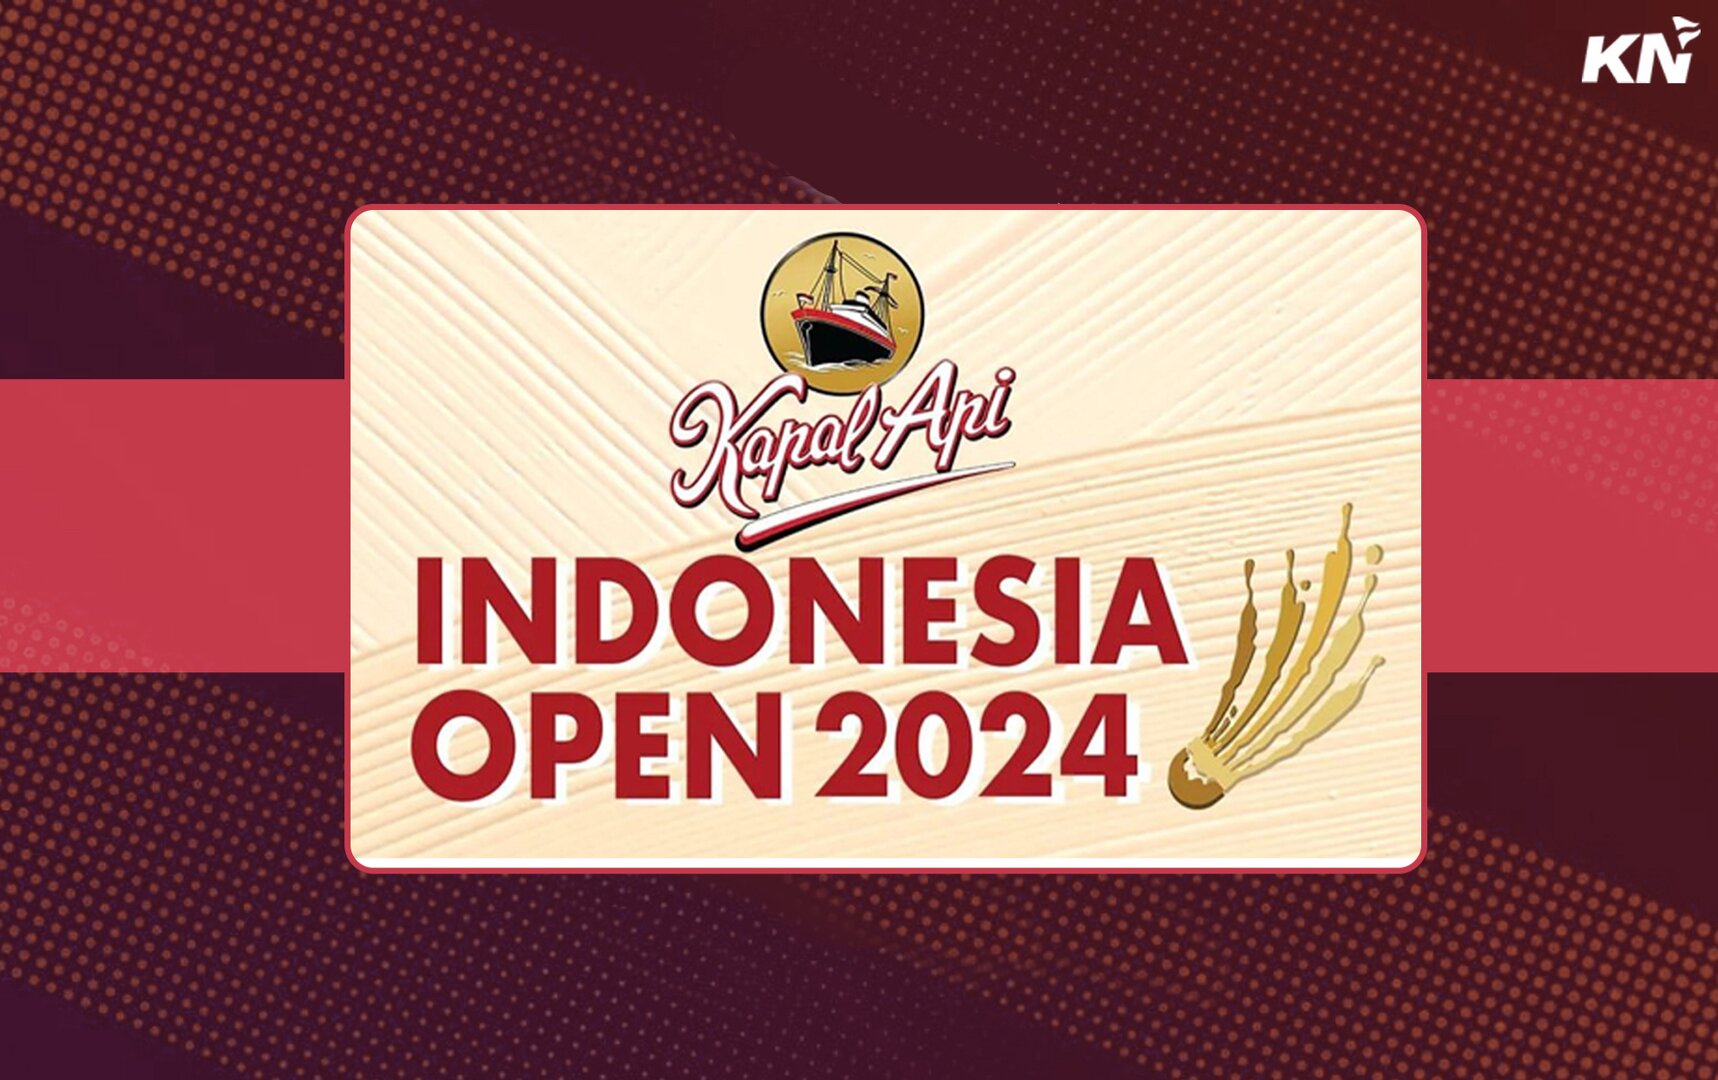 Indonesia Open 2024 Live streaming, TV channel, where and how to watch